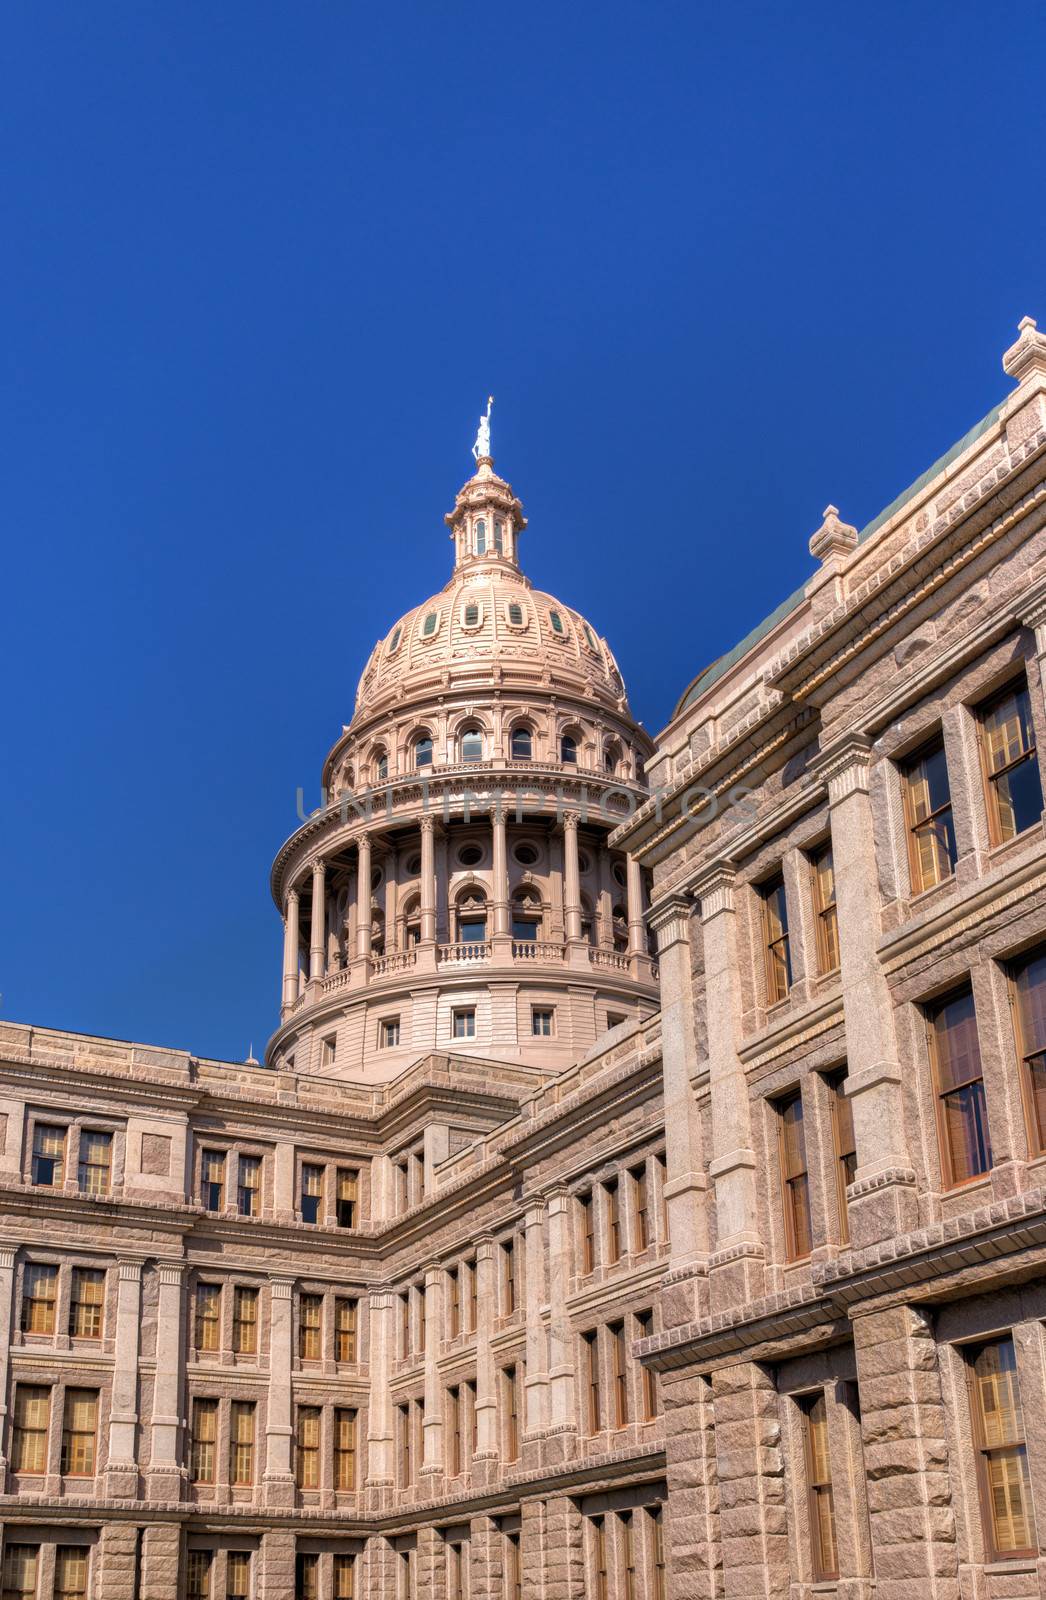 Vertical Image of the Texas State Capitol Building in Austin, Texas, USA